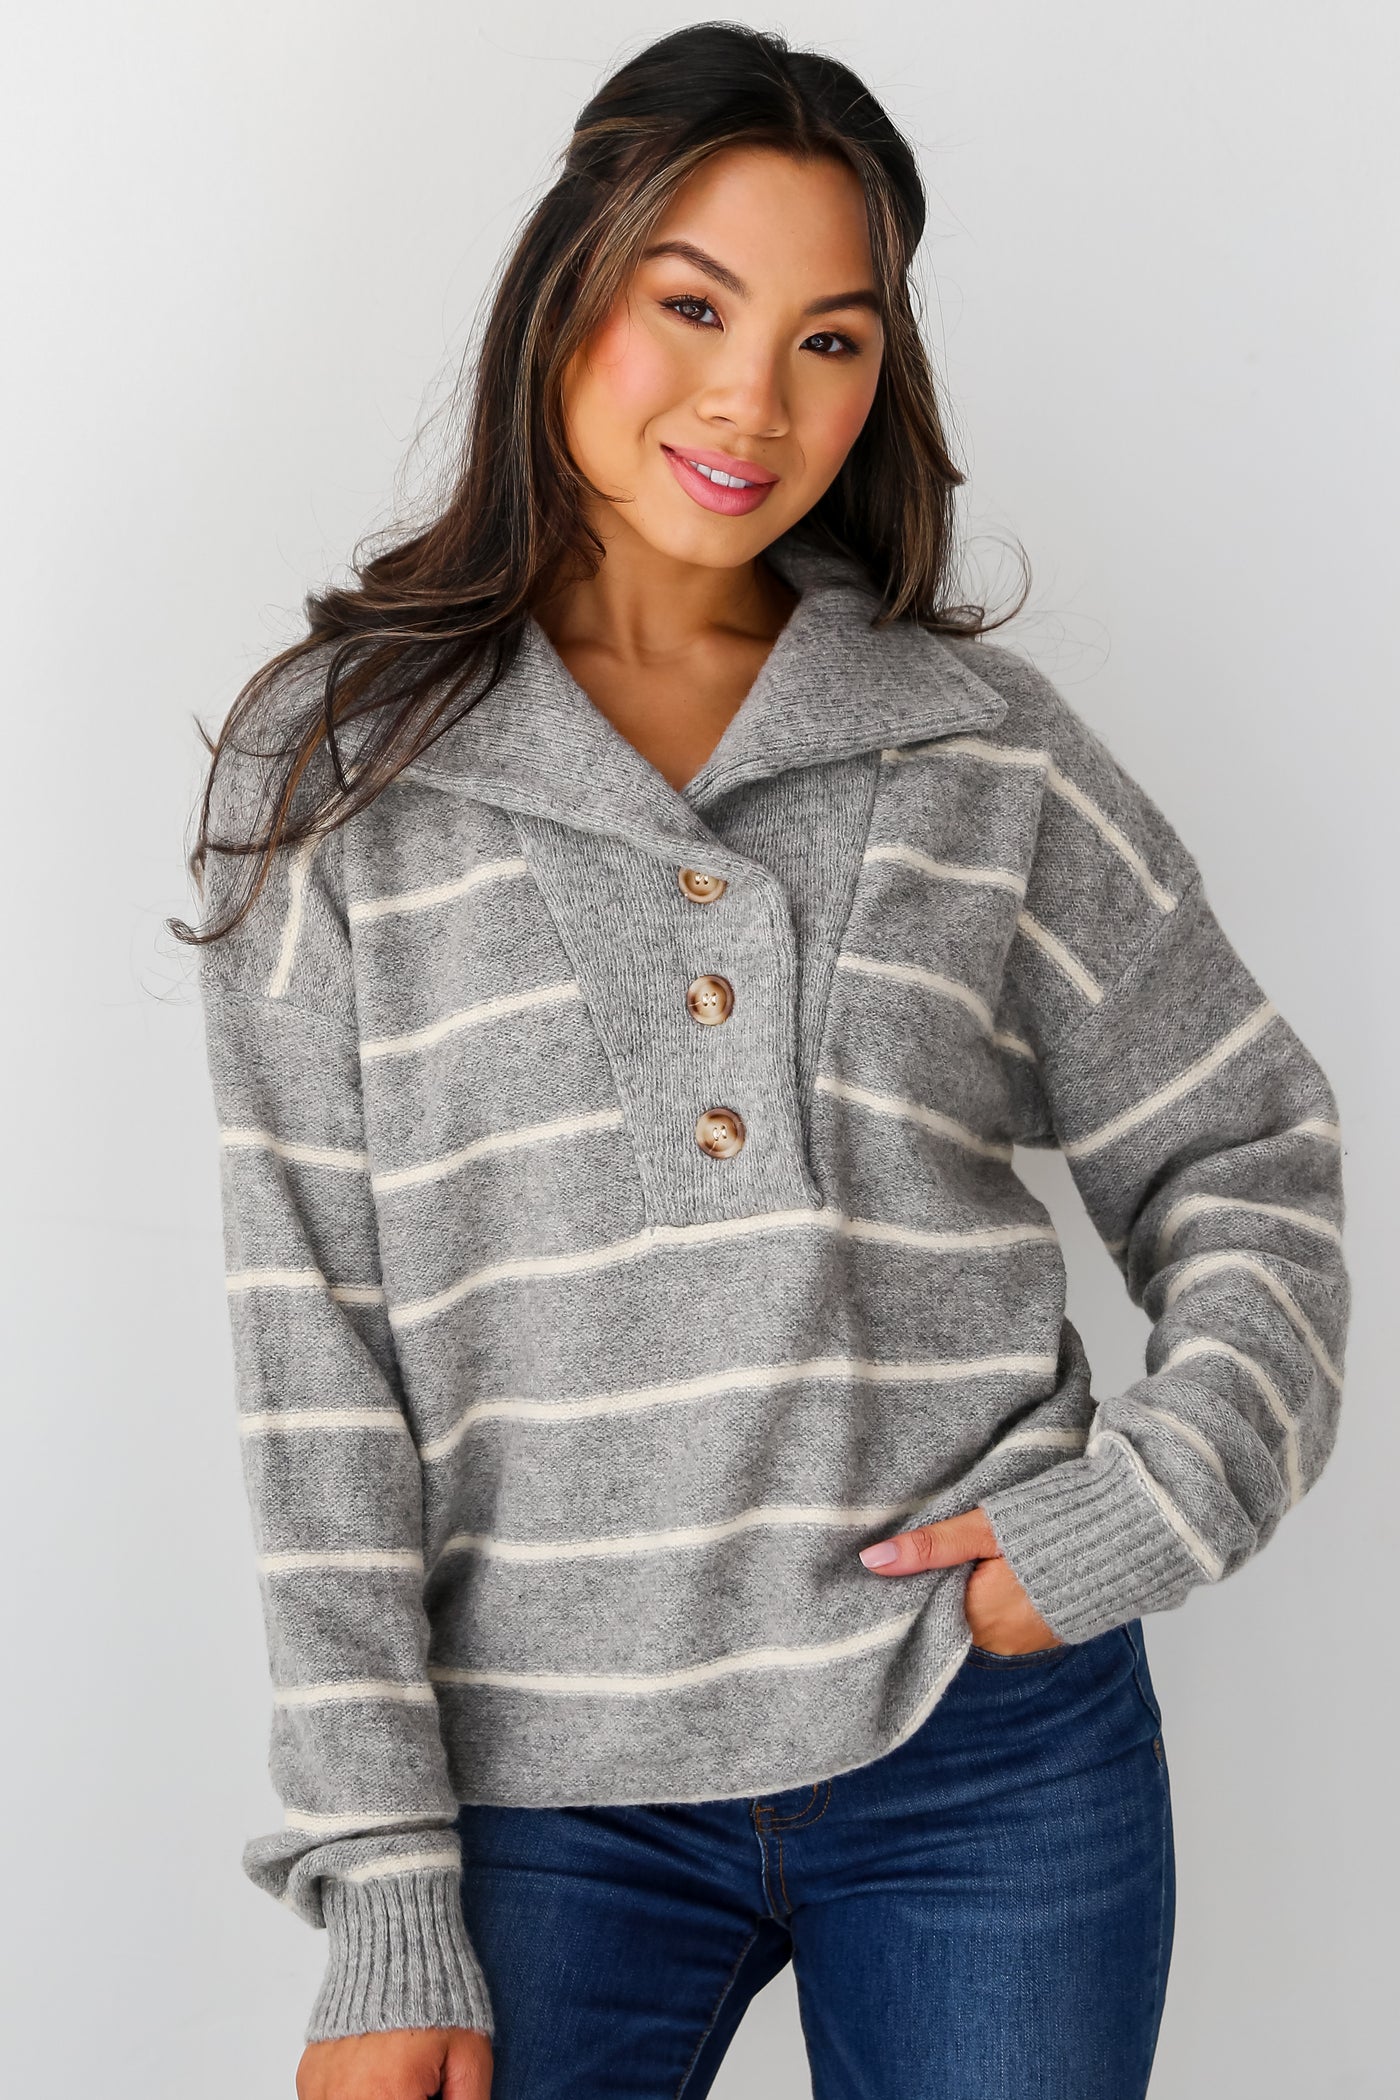 Heather Grey Striped Collared Oversized Sweater front view